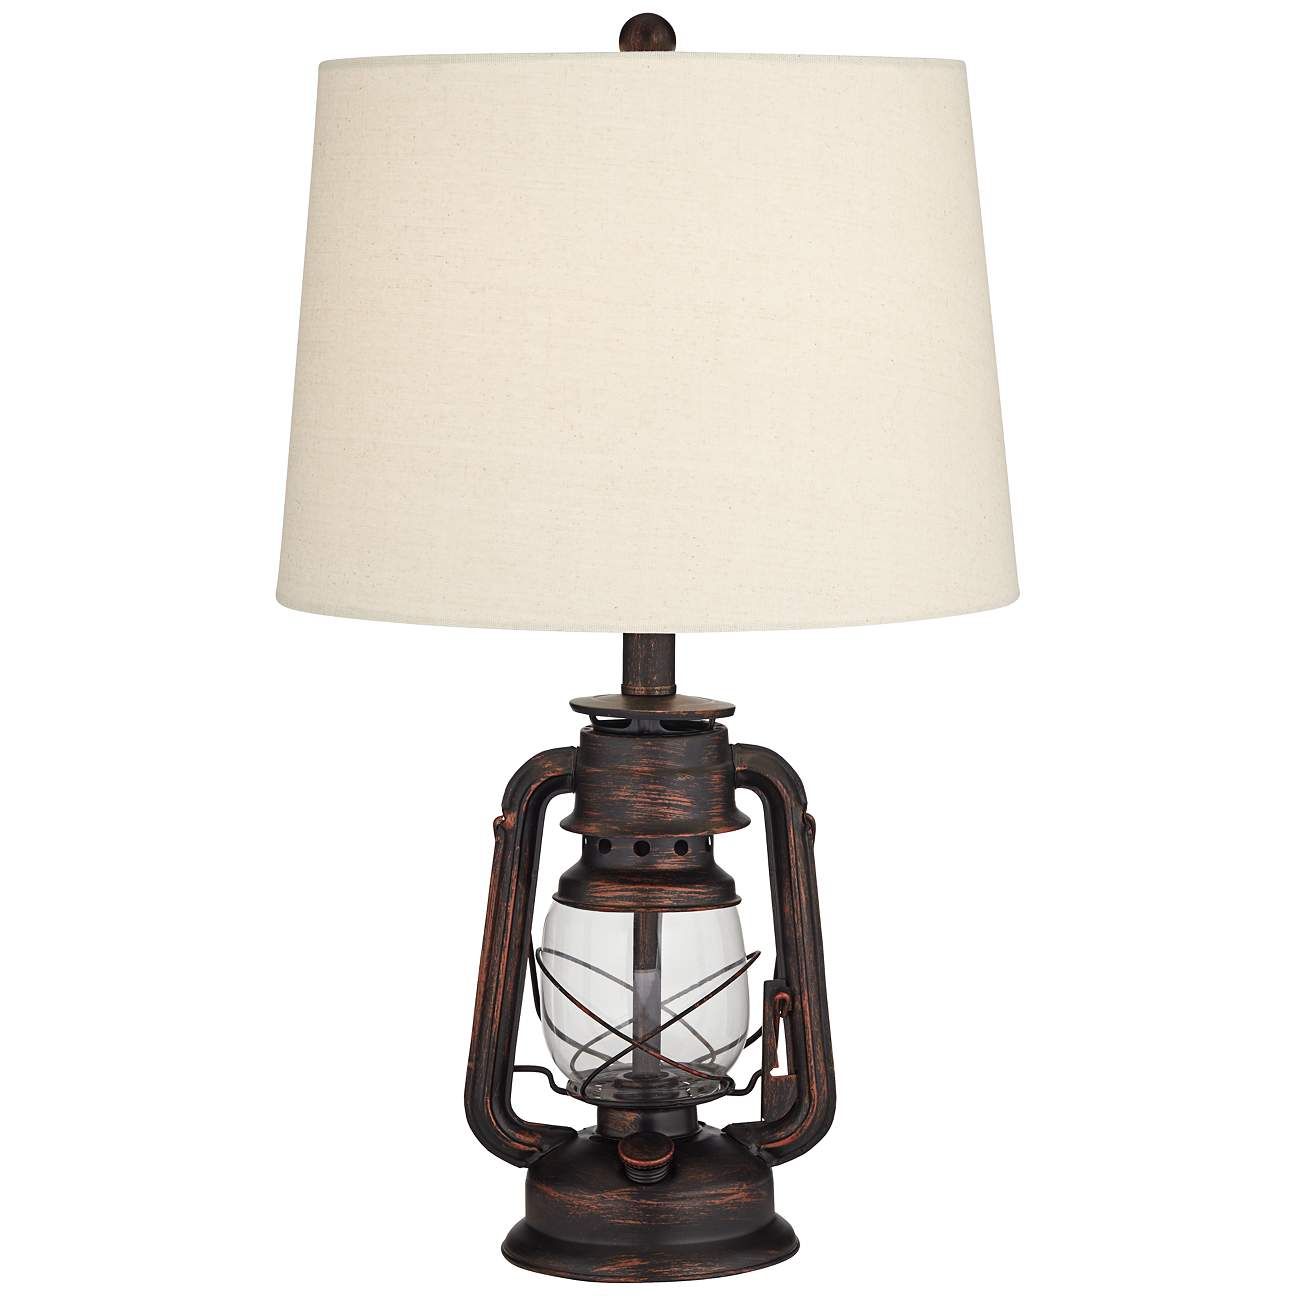 Murphy Red Bronze Miner Lantern Table Lamp with Table Top Dimmer | LampsPlus.com